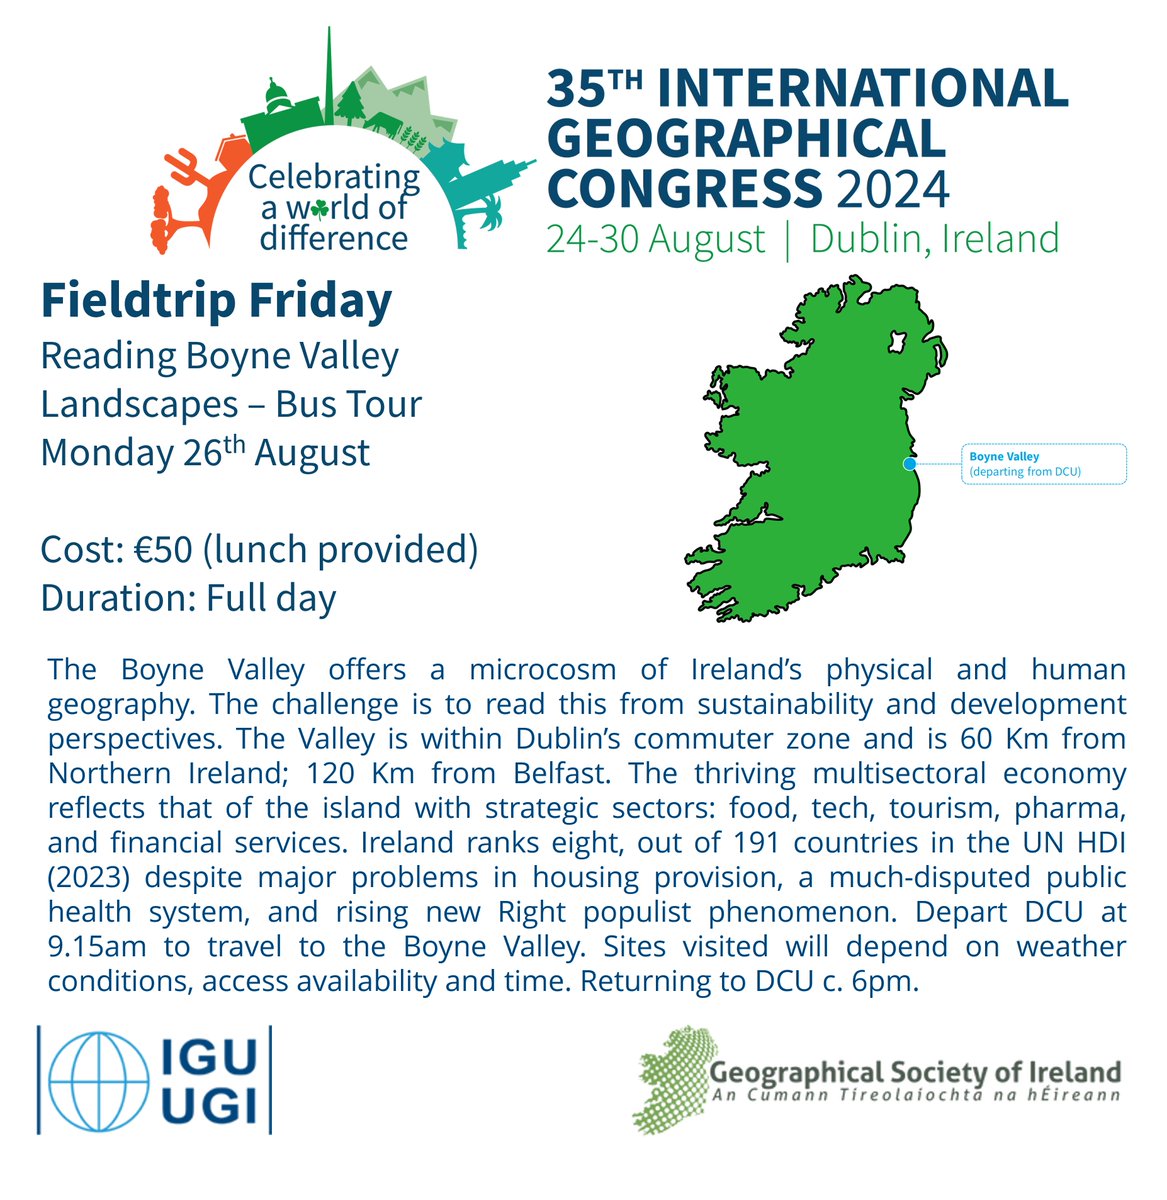 It's Fieldtrip Friday, the day we promote the fabulous fieldtrips happening this August as part of #IGC2024 Why not take a bus tour of the Boyne Valley, a scenic and fascinating Irish landscape? Learn more about this and other field trips on our website: igc2024dublin.org/field-trips/